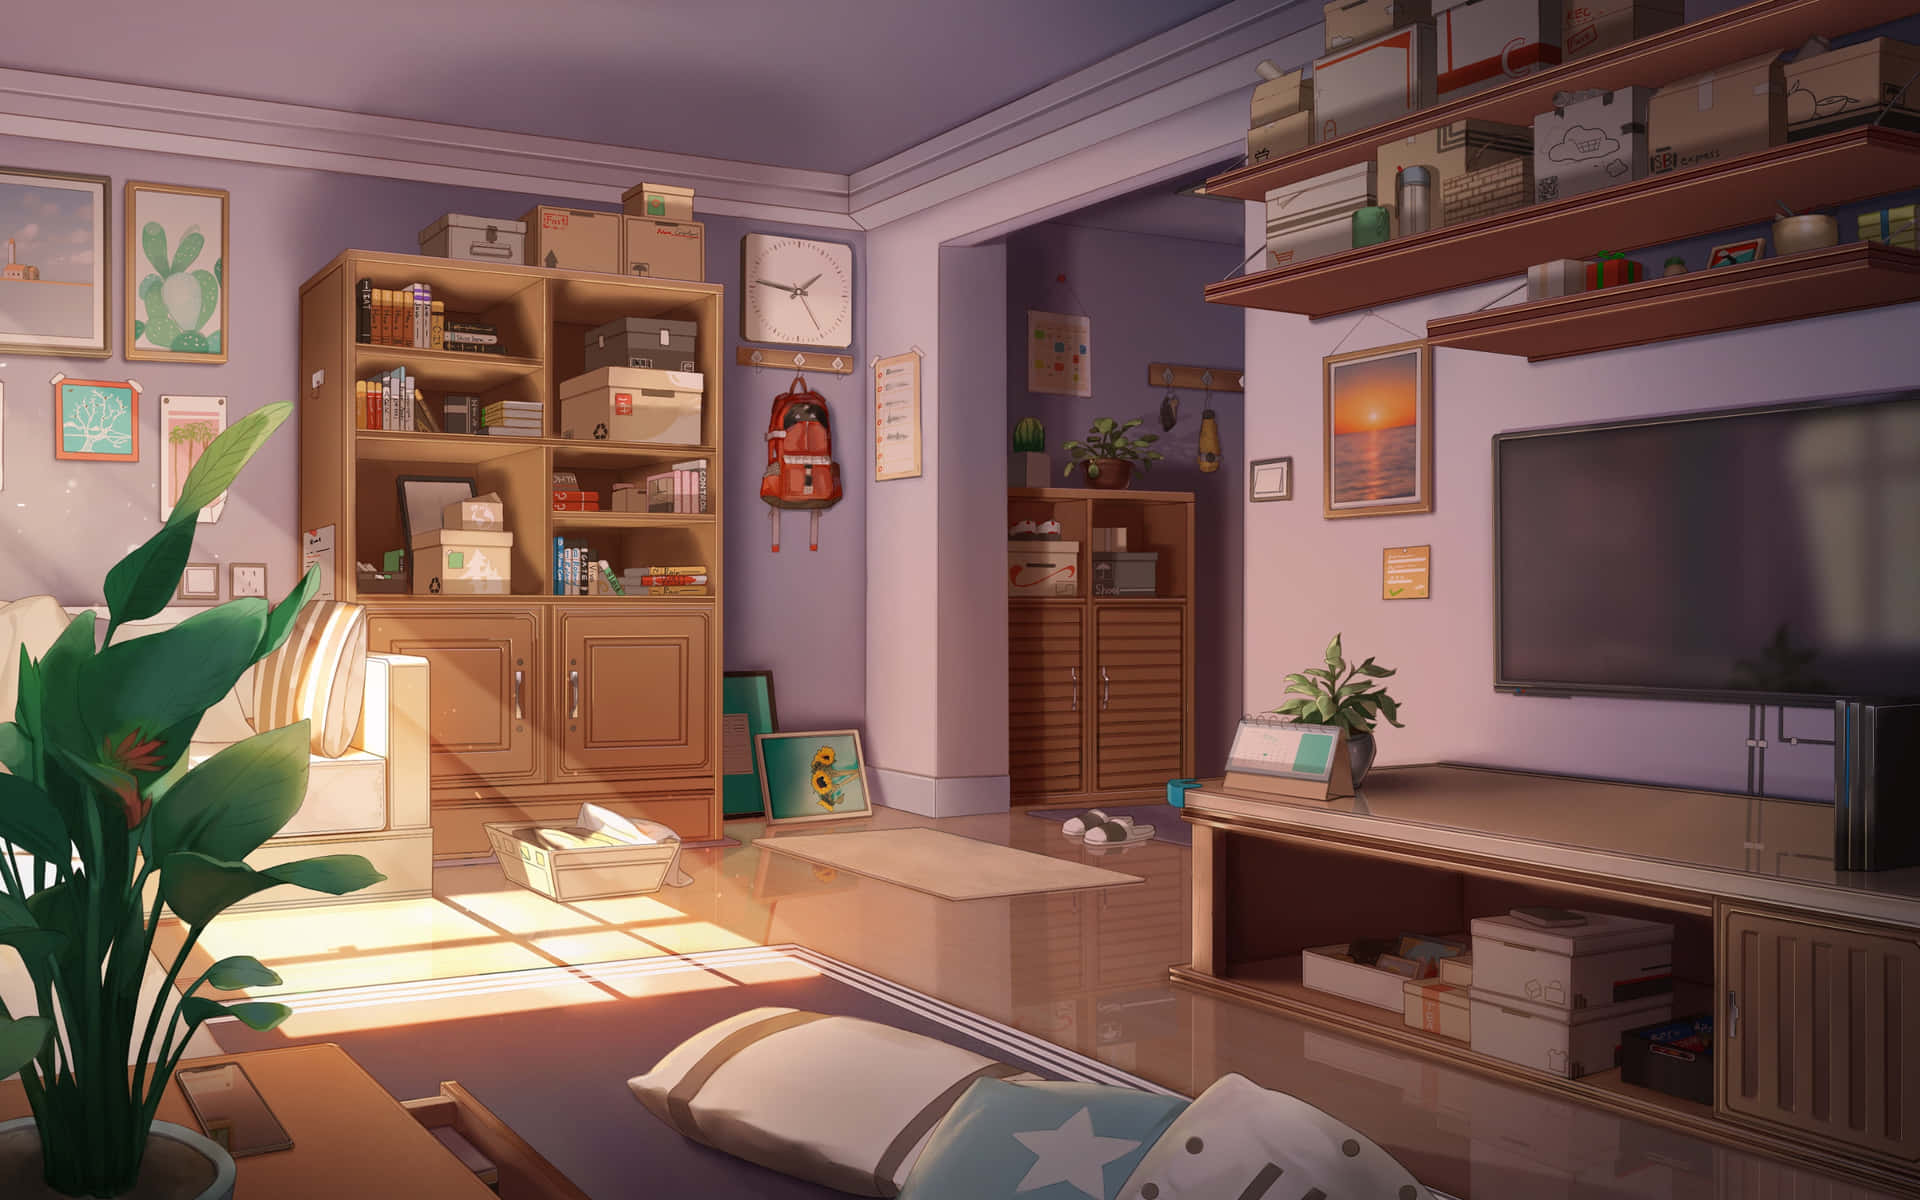 A bright and inviting living space with a touch of Anime